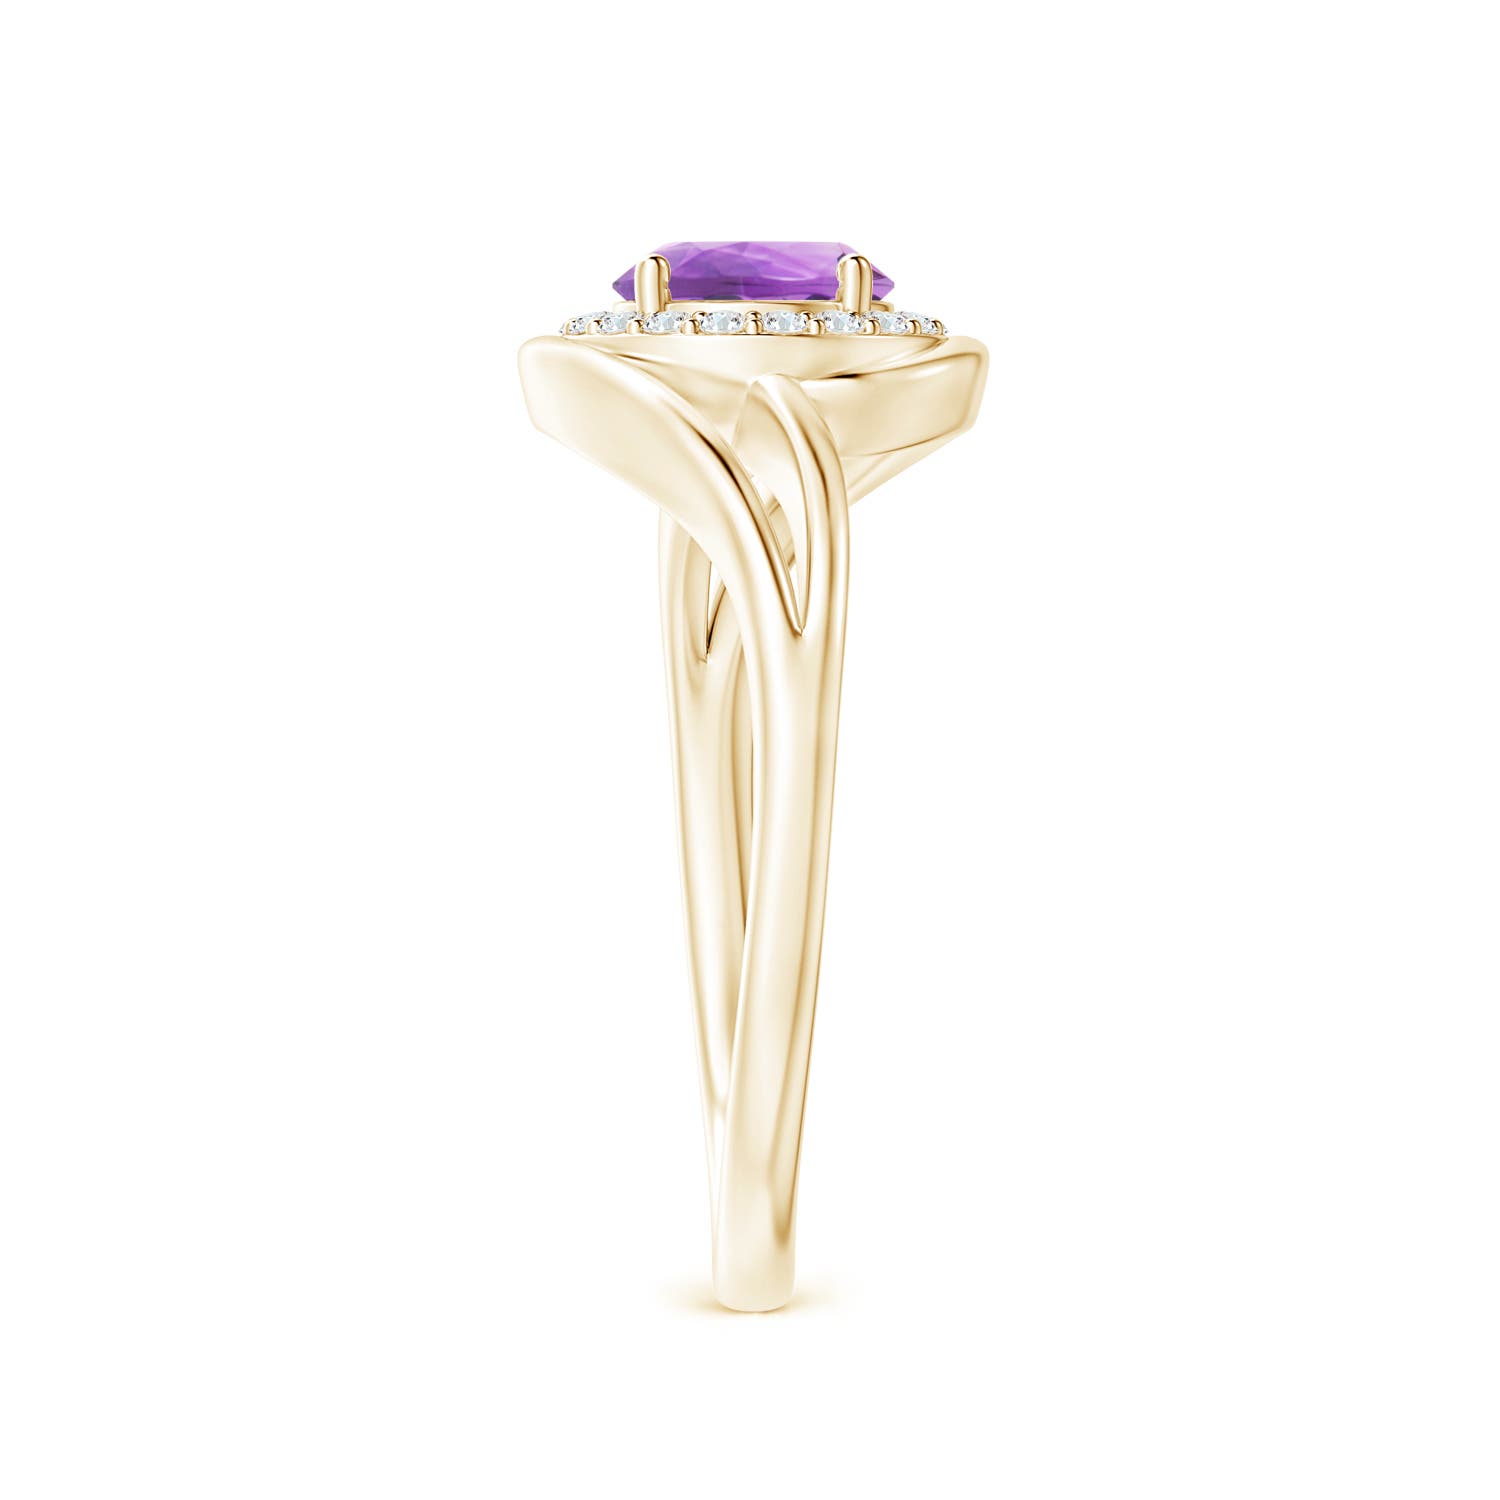 A - Amethyst / 0.91 CT / 14 KT Yellow Gold